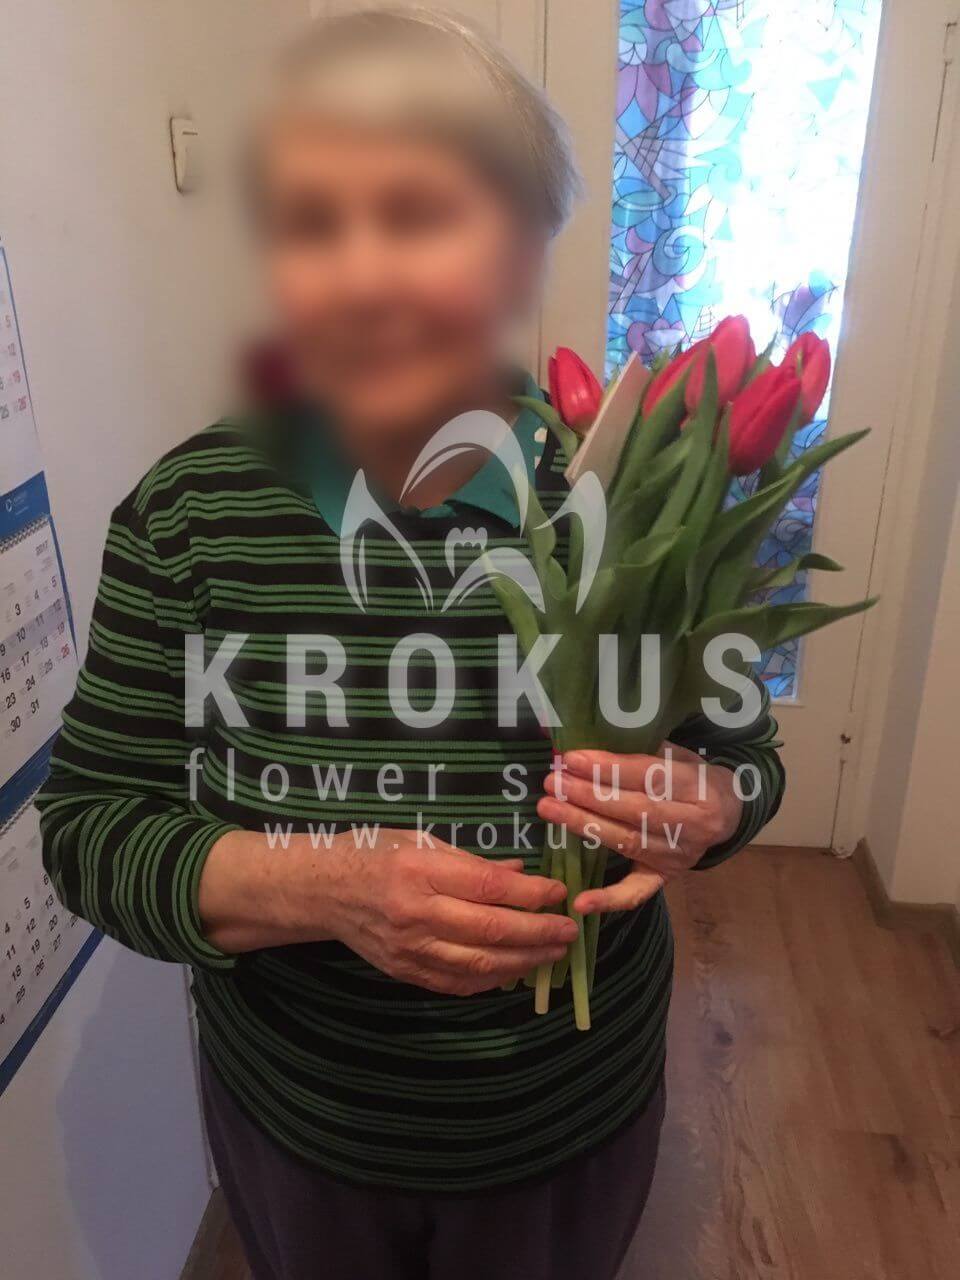 Deliver flowers to Latvia (tulips)